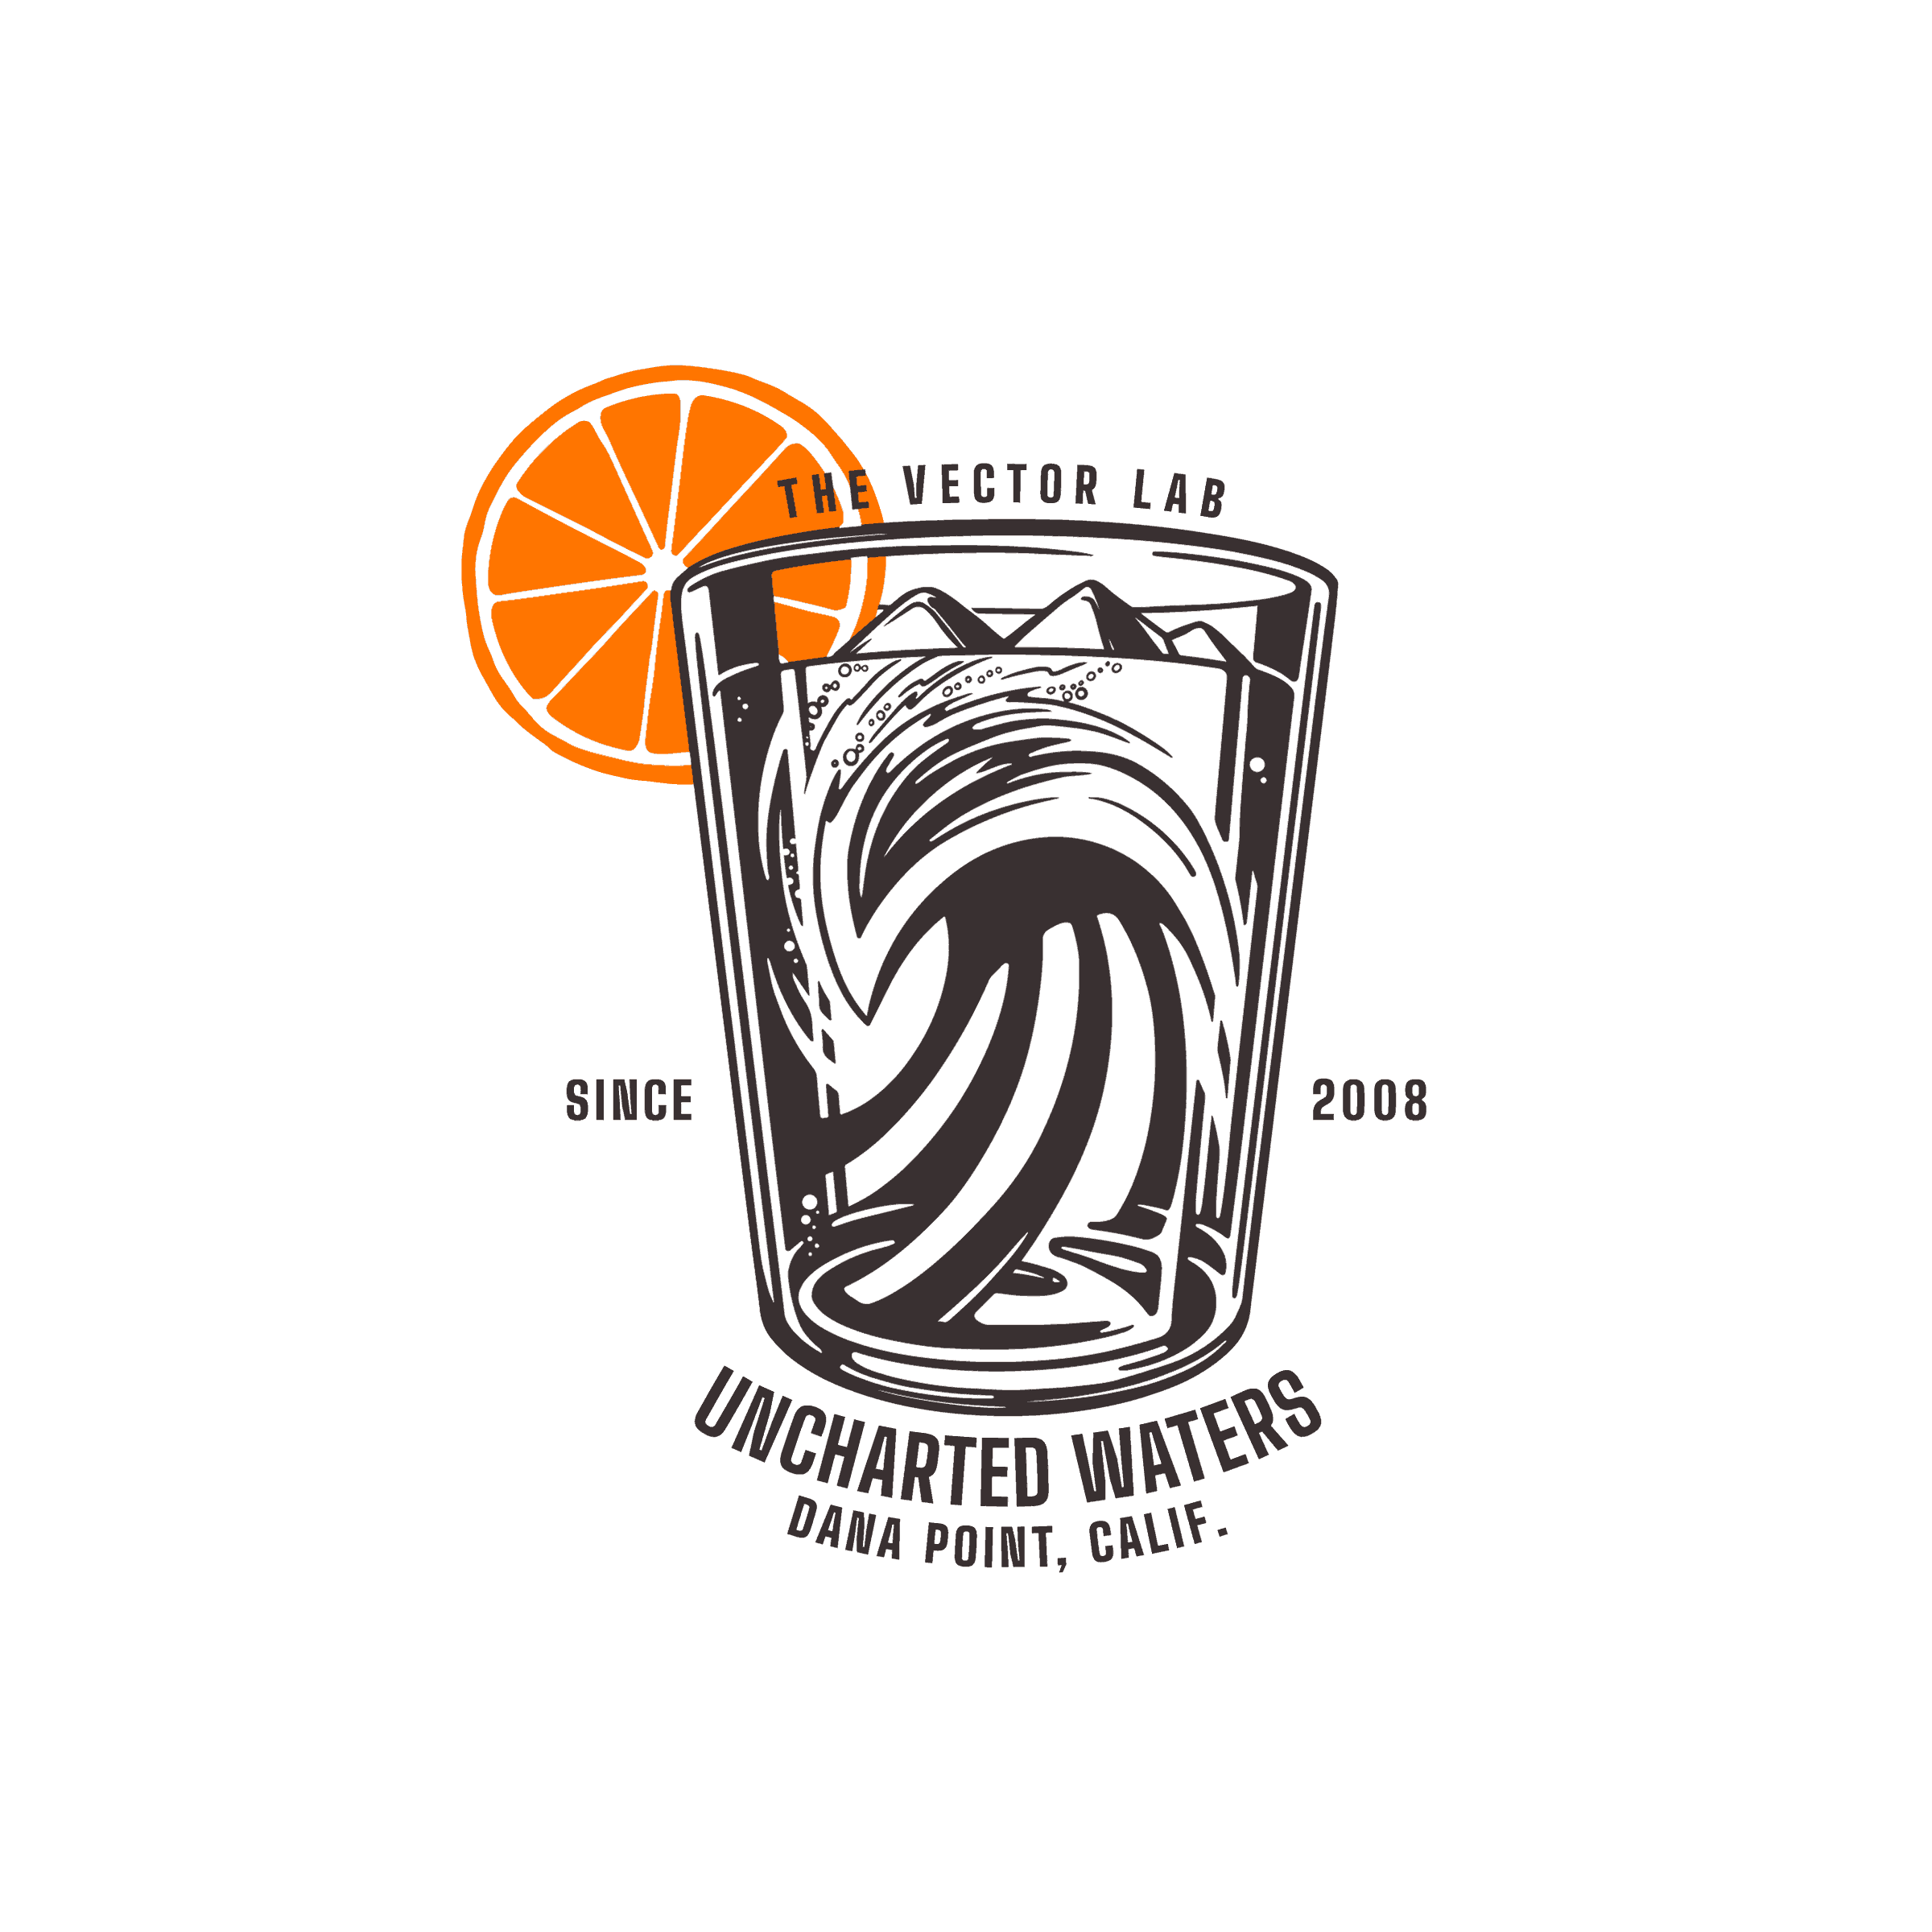 Uncharted Waters - T-Shirt Graphics